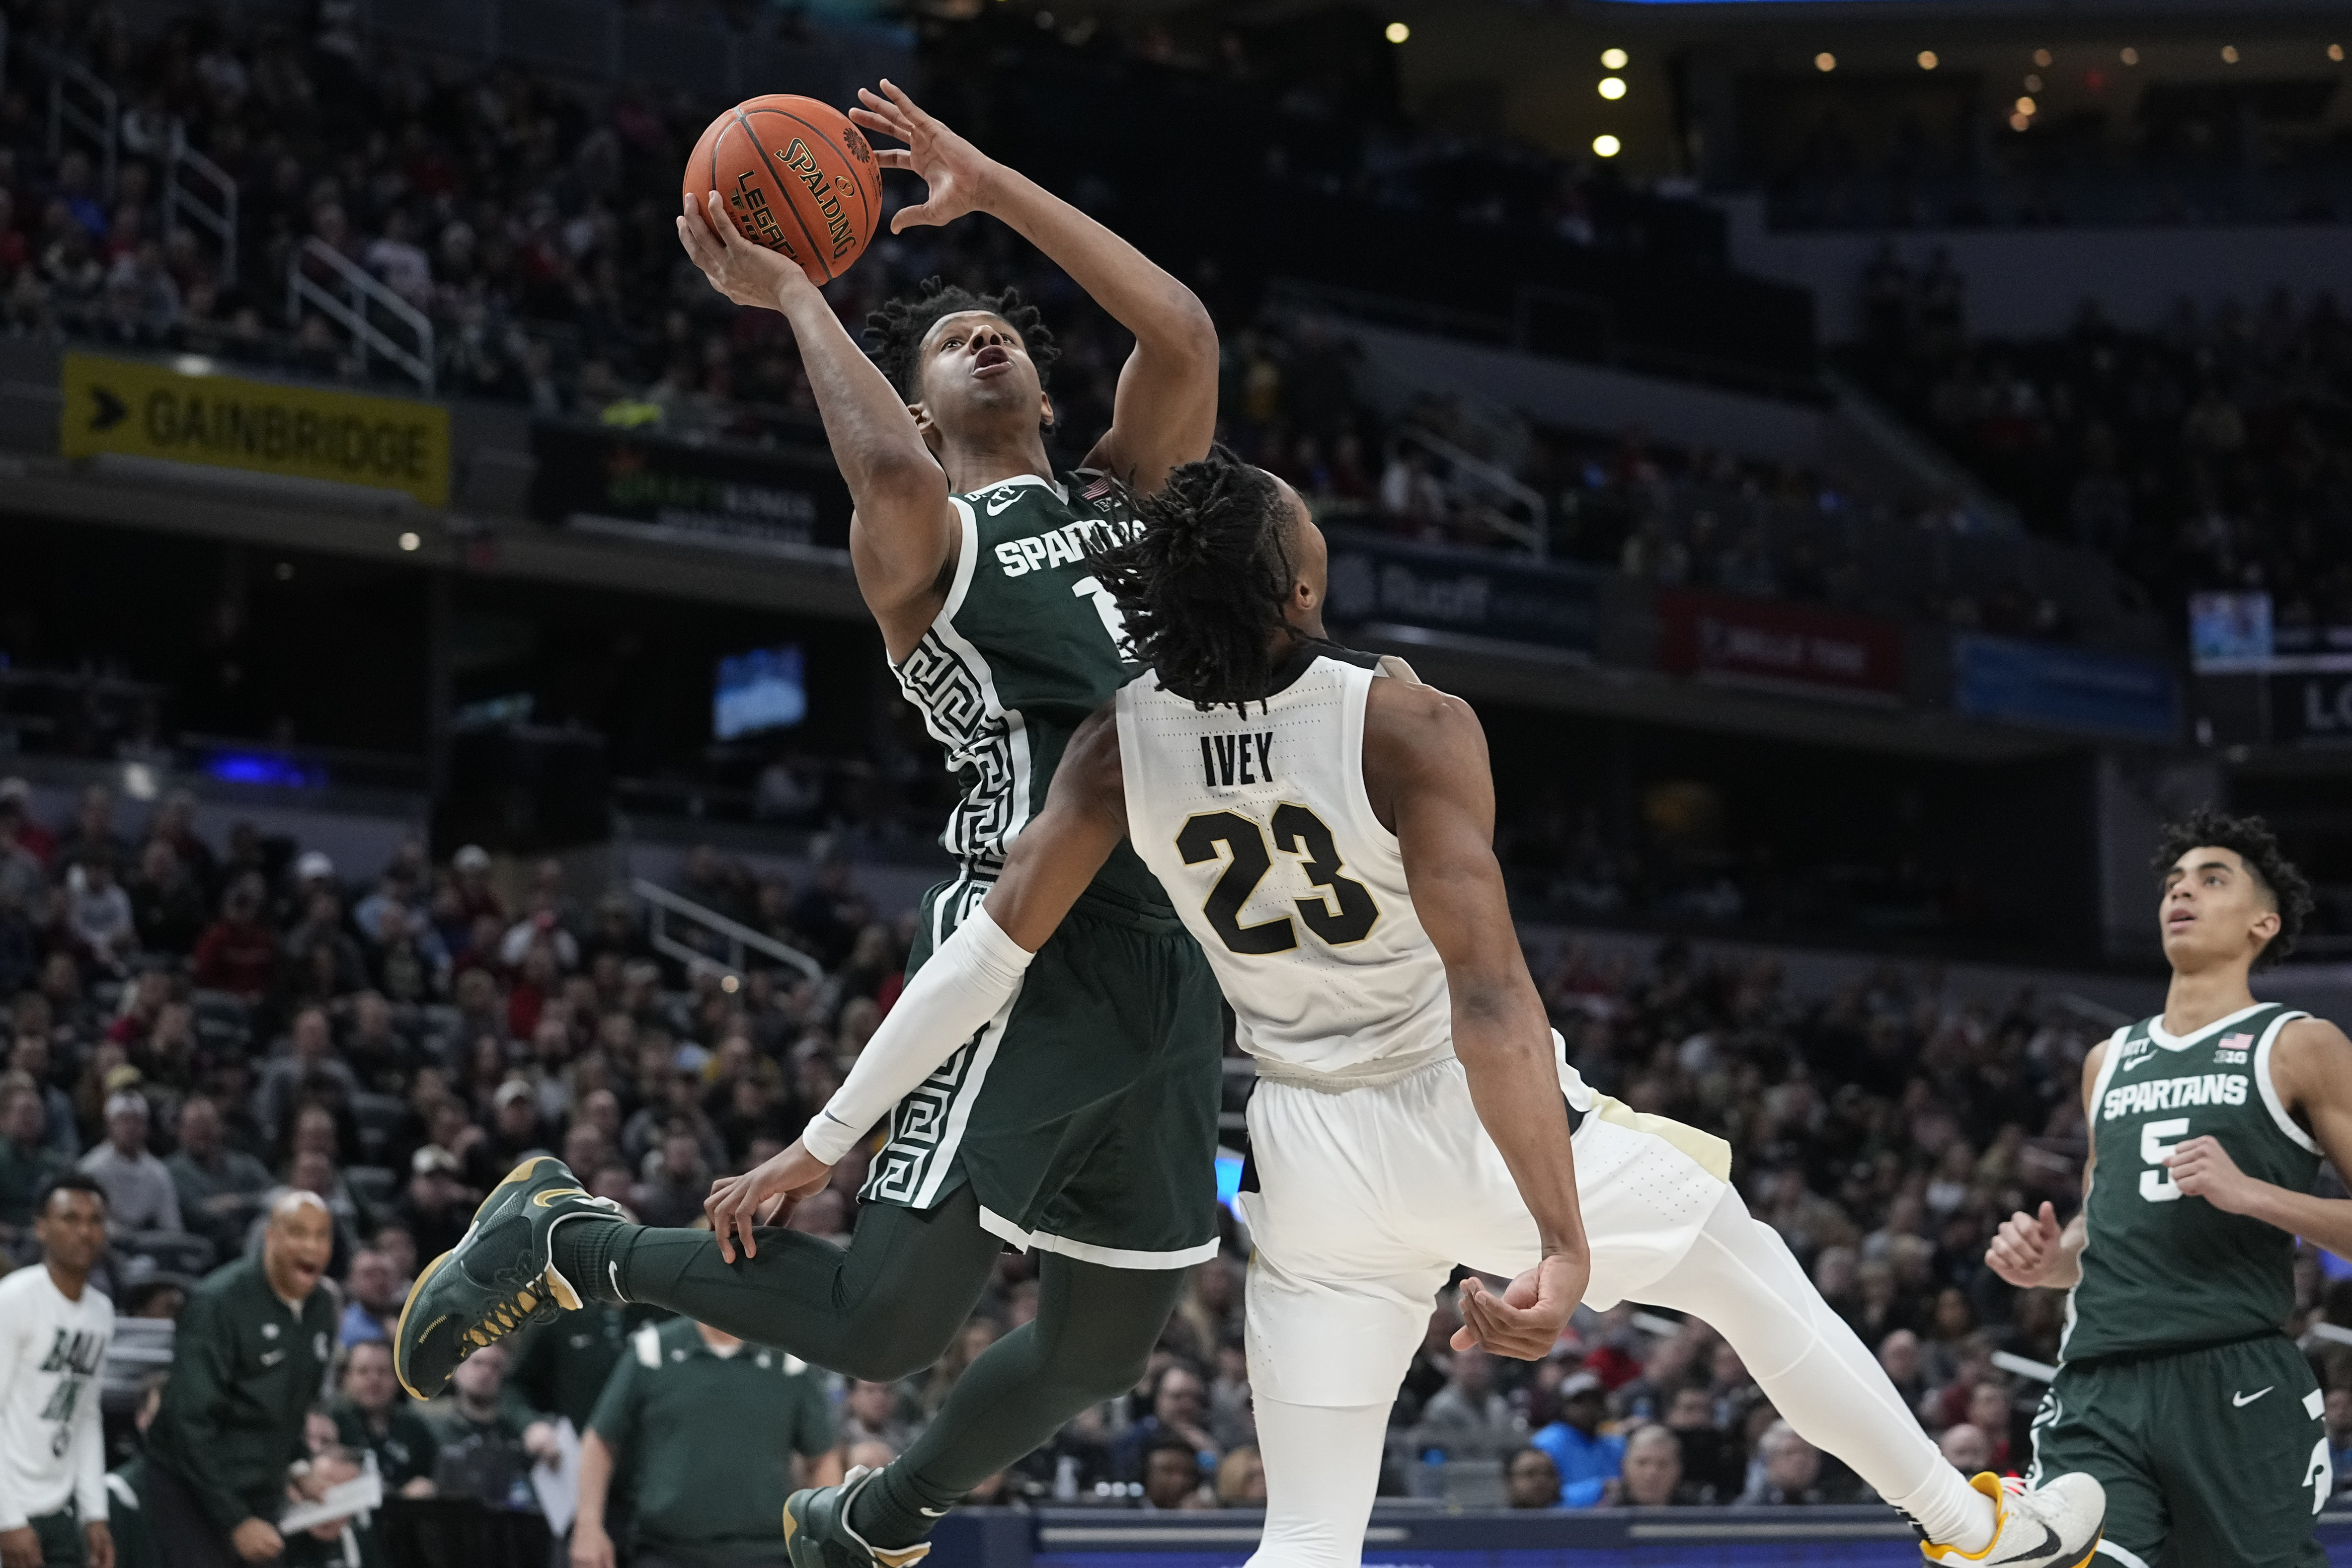 Michigan State-Davidson live stream (3/18) How to watch NCAA tournament online, TV, time